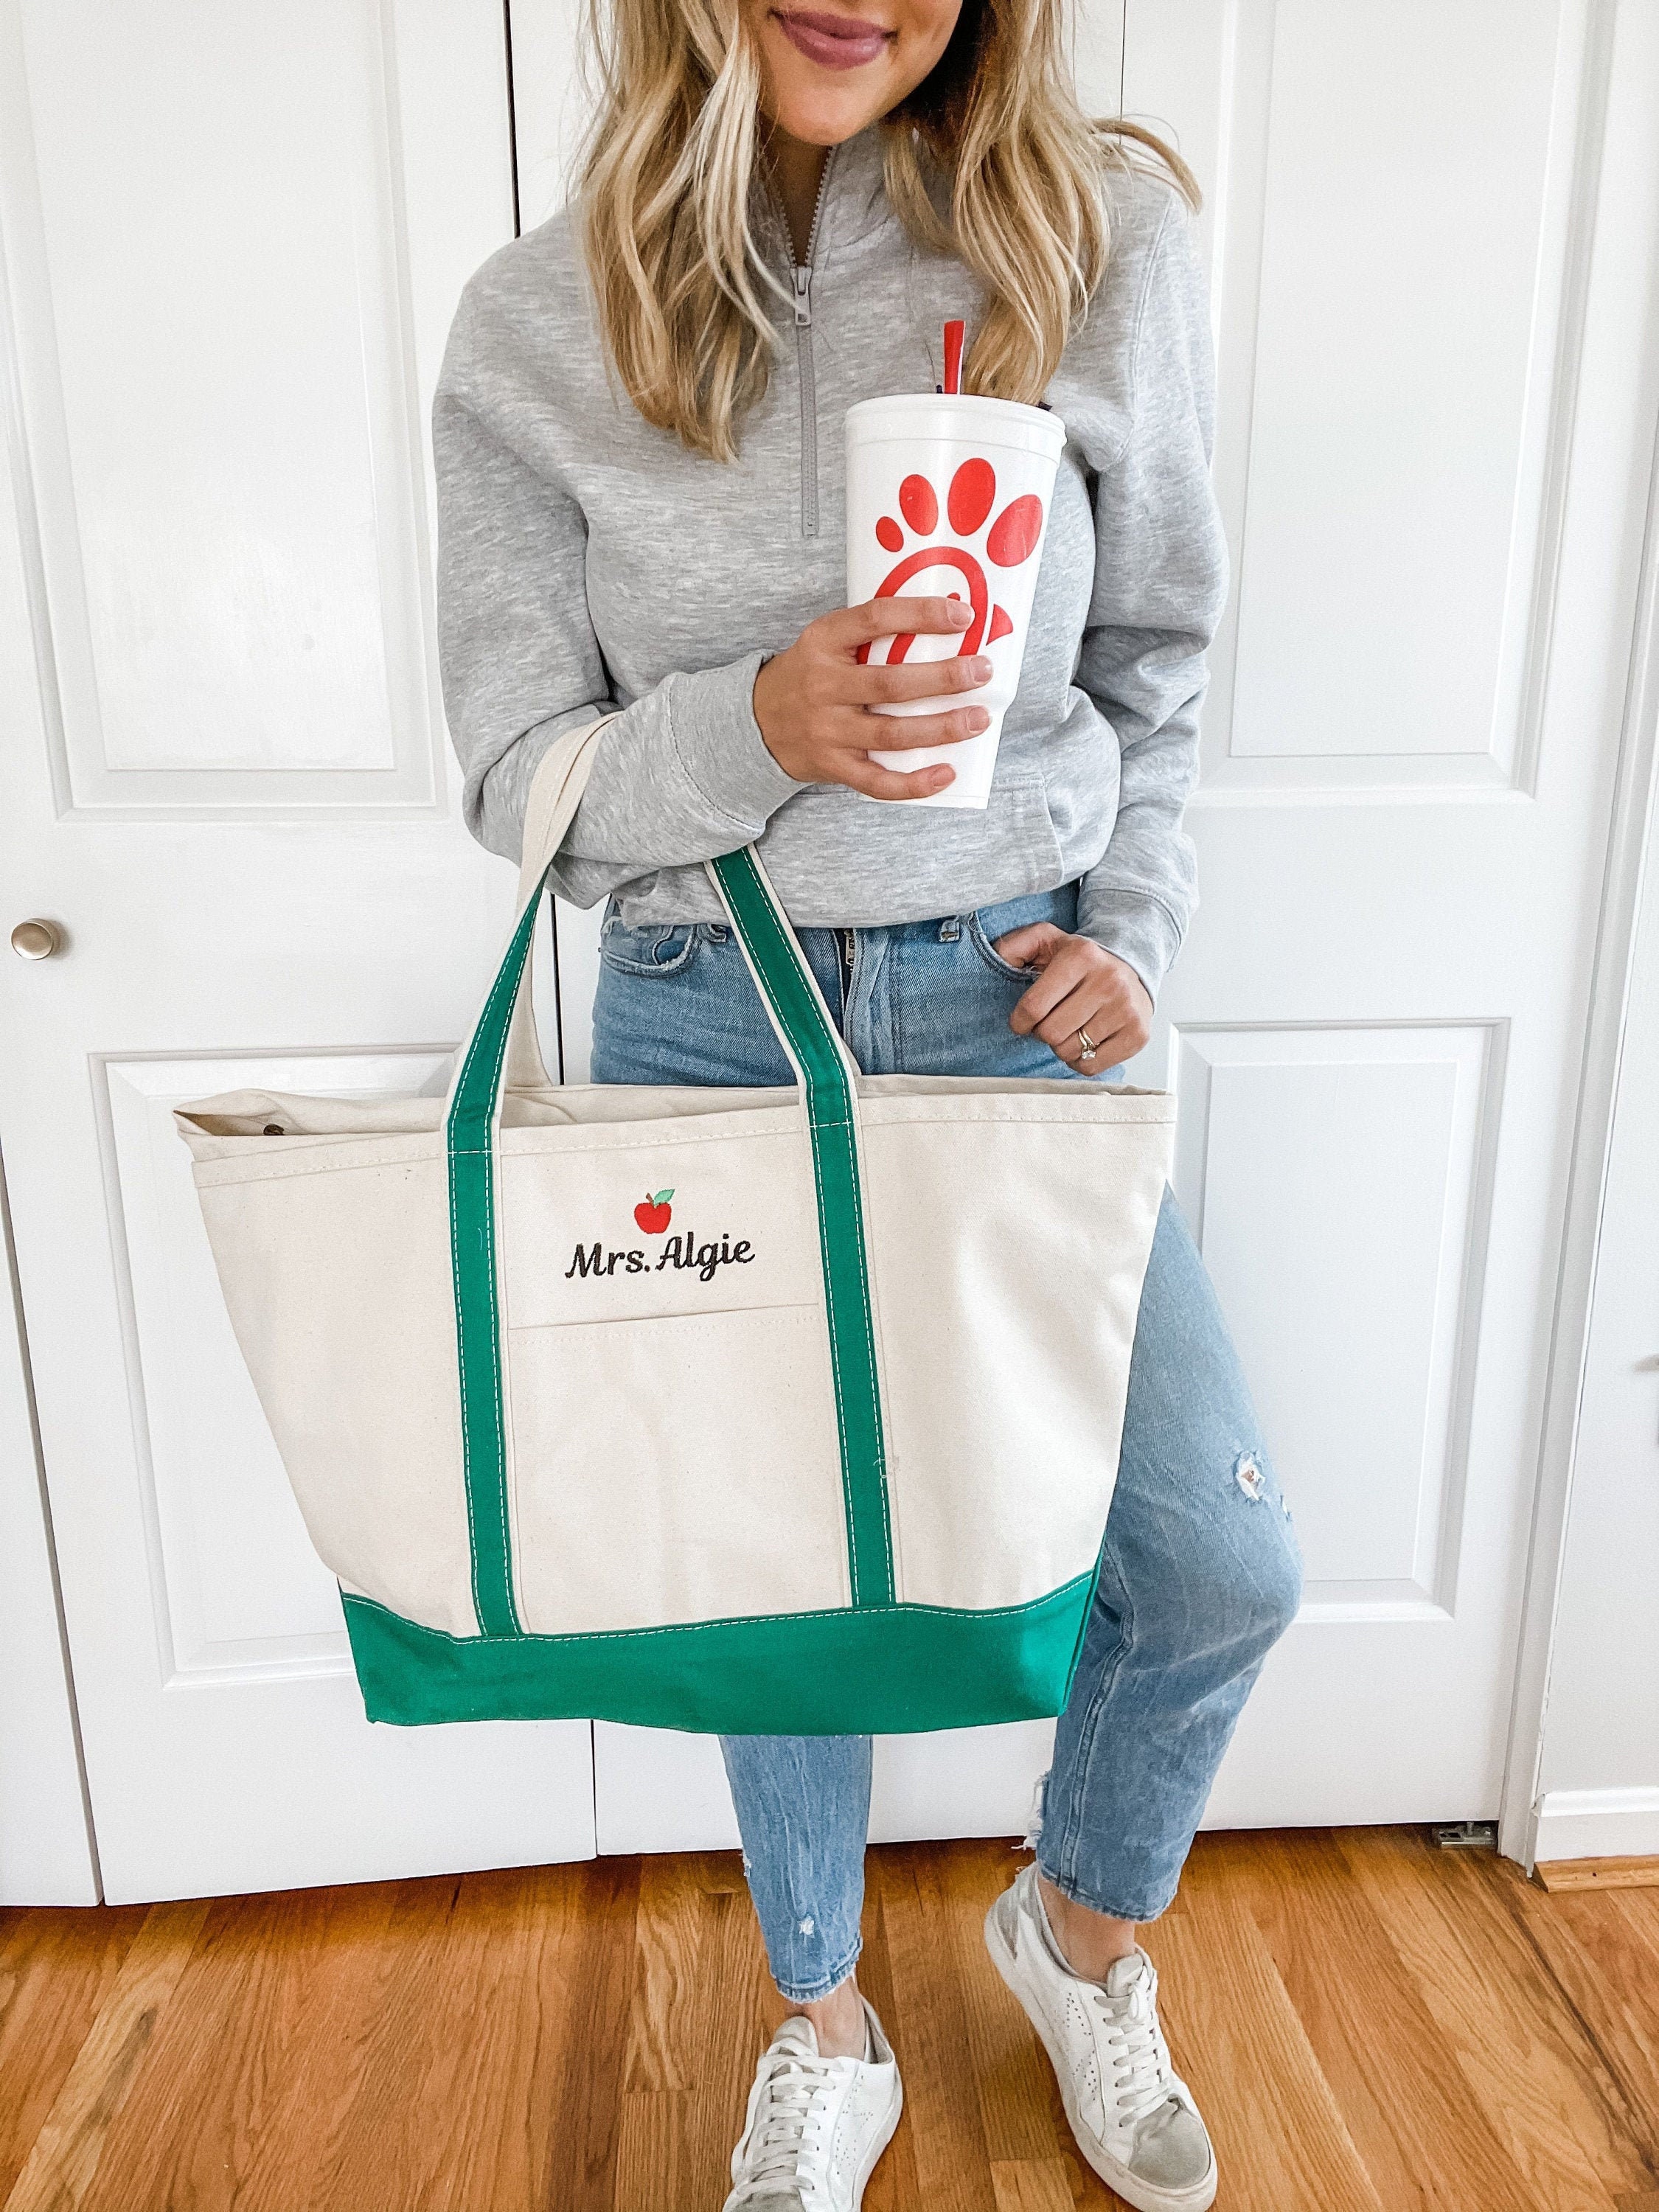 Instagram Page of L.L. Bean Boat and Totes With Funny Monograms